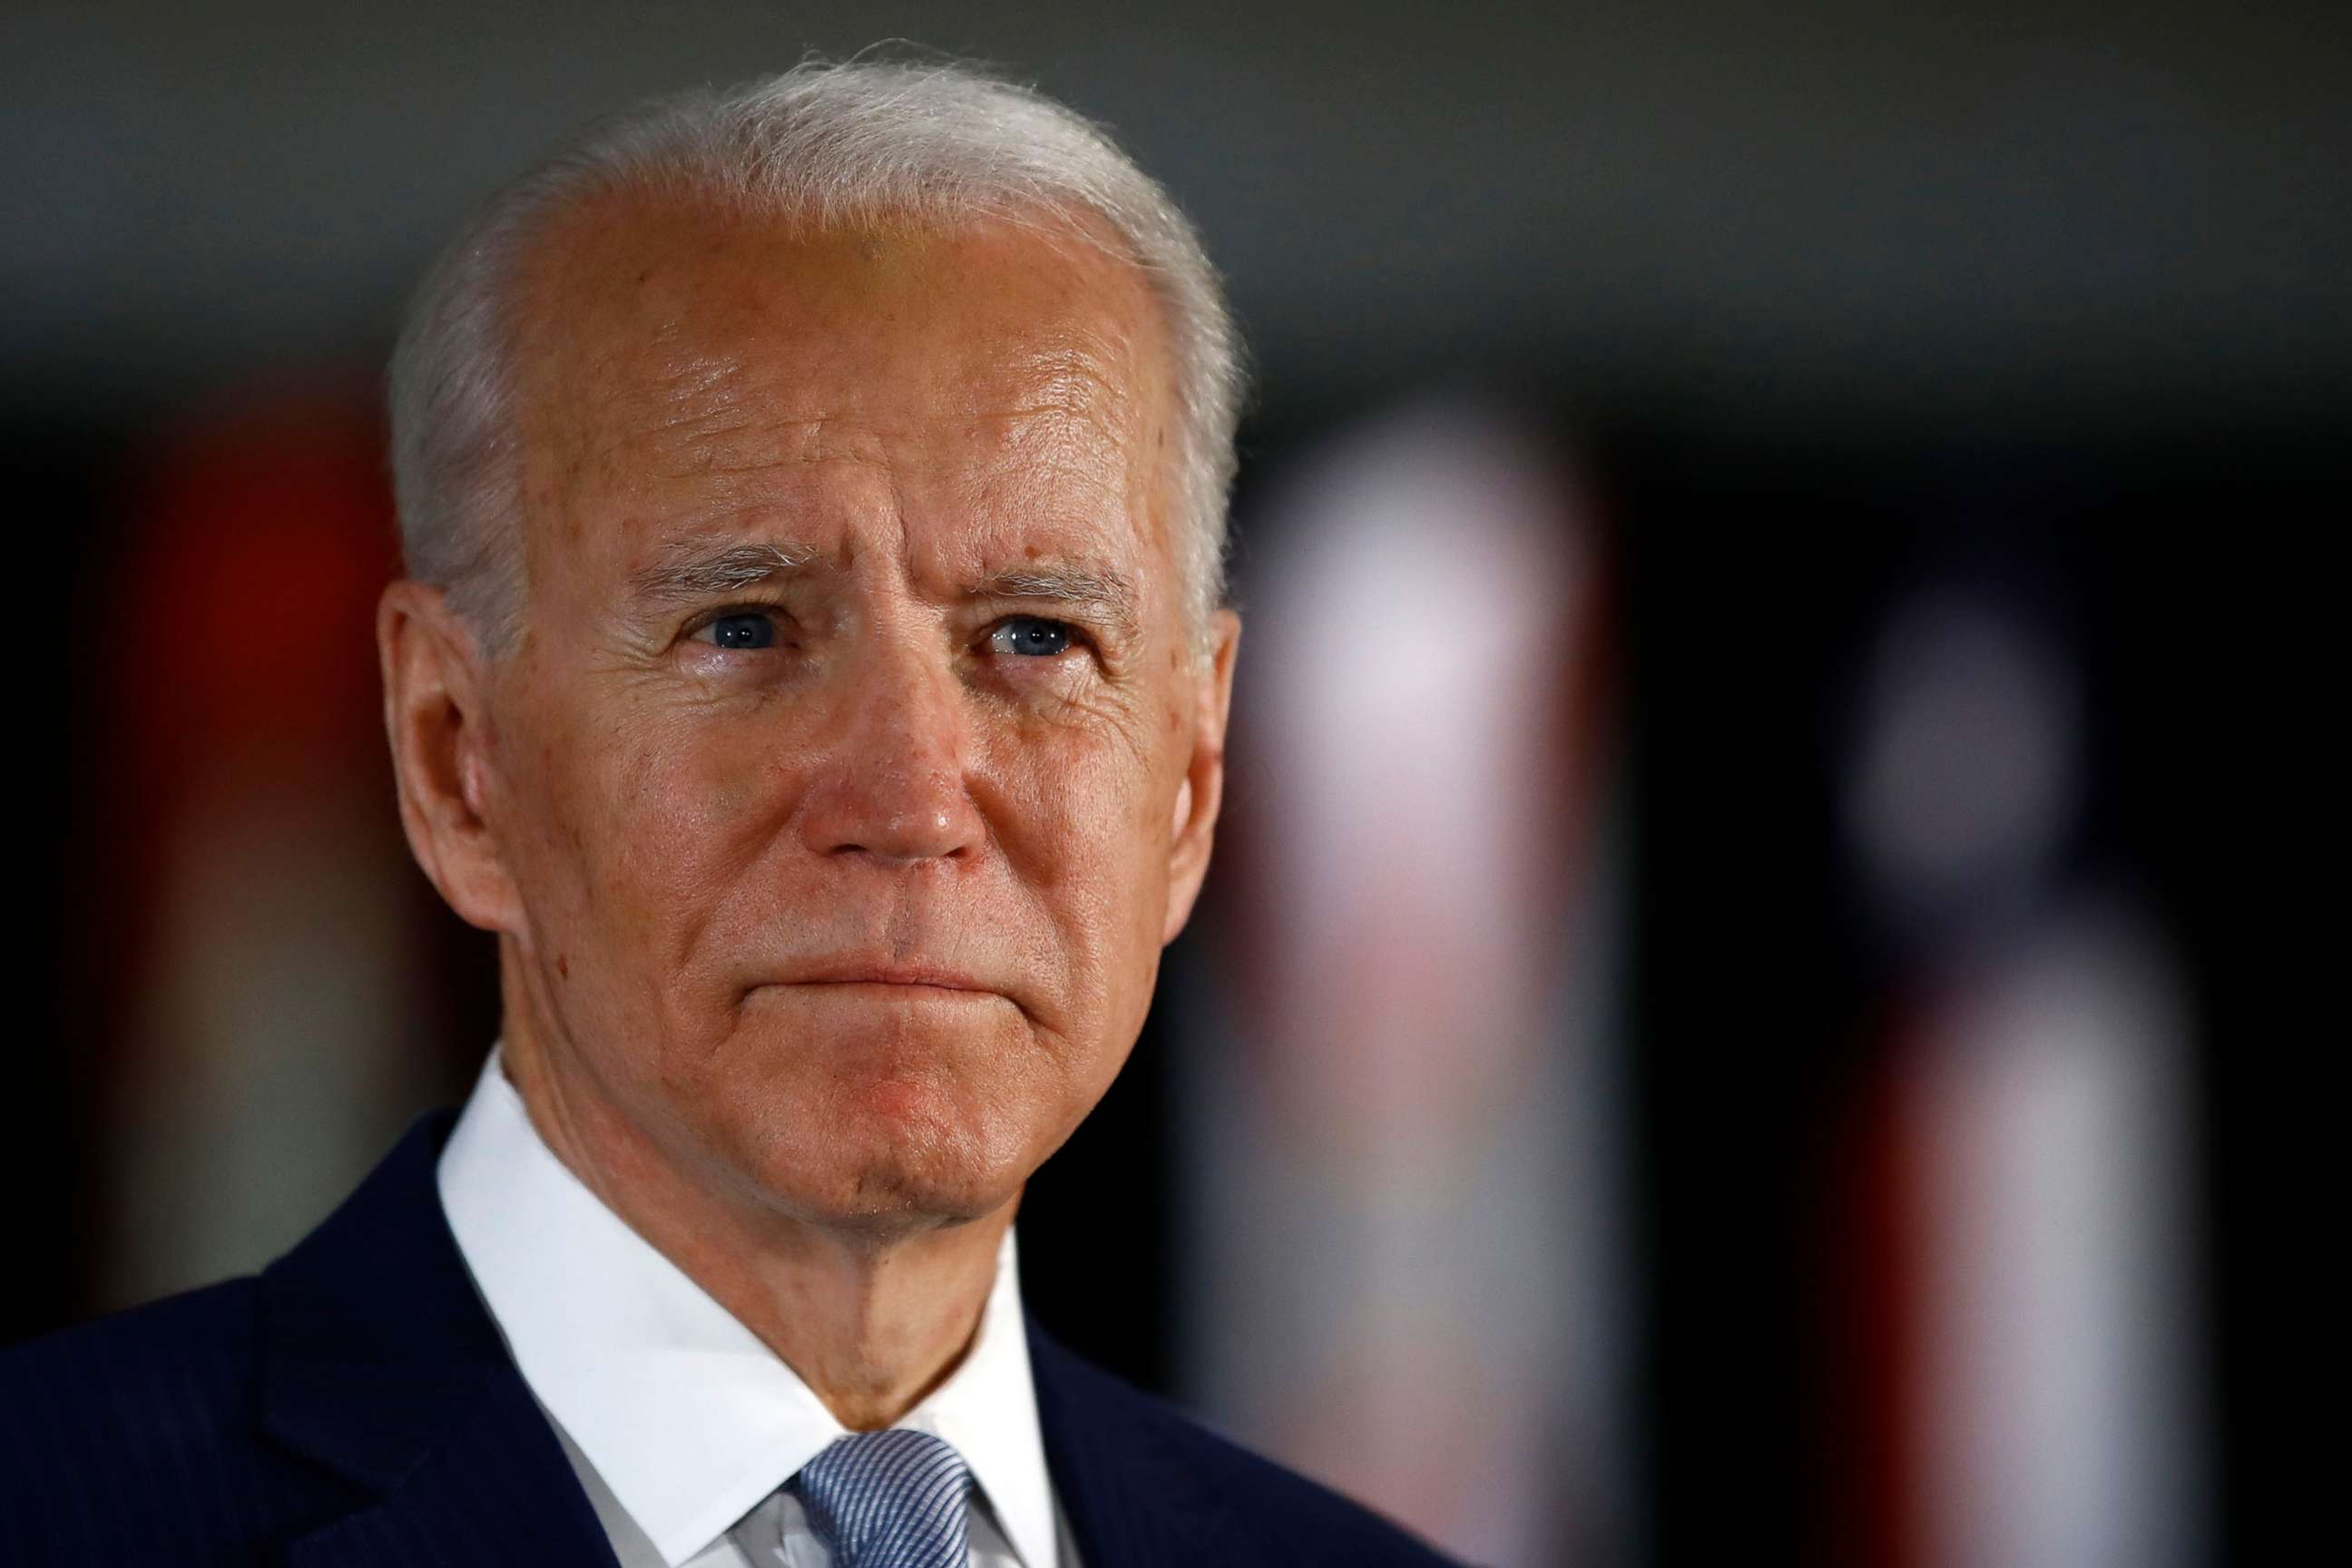 PHOTO: Democratic presidential candidate former Vice President Joe Biden speaks to members of the press at the National Constitution Center in Philadelphia, March 10, 2020.